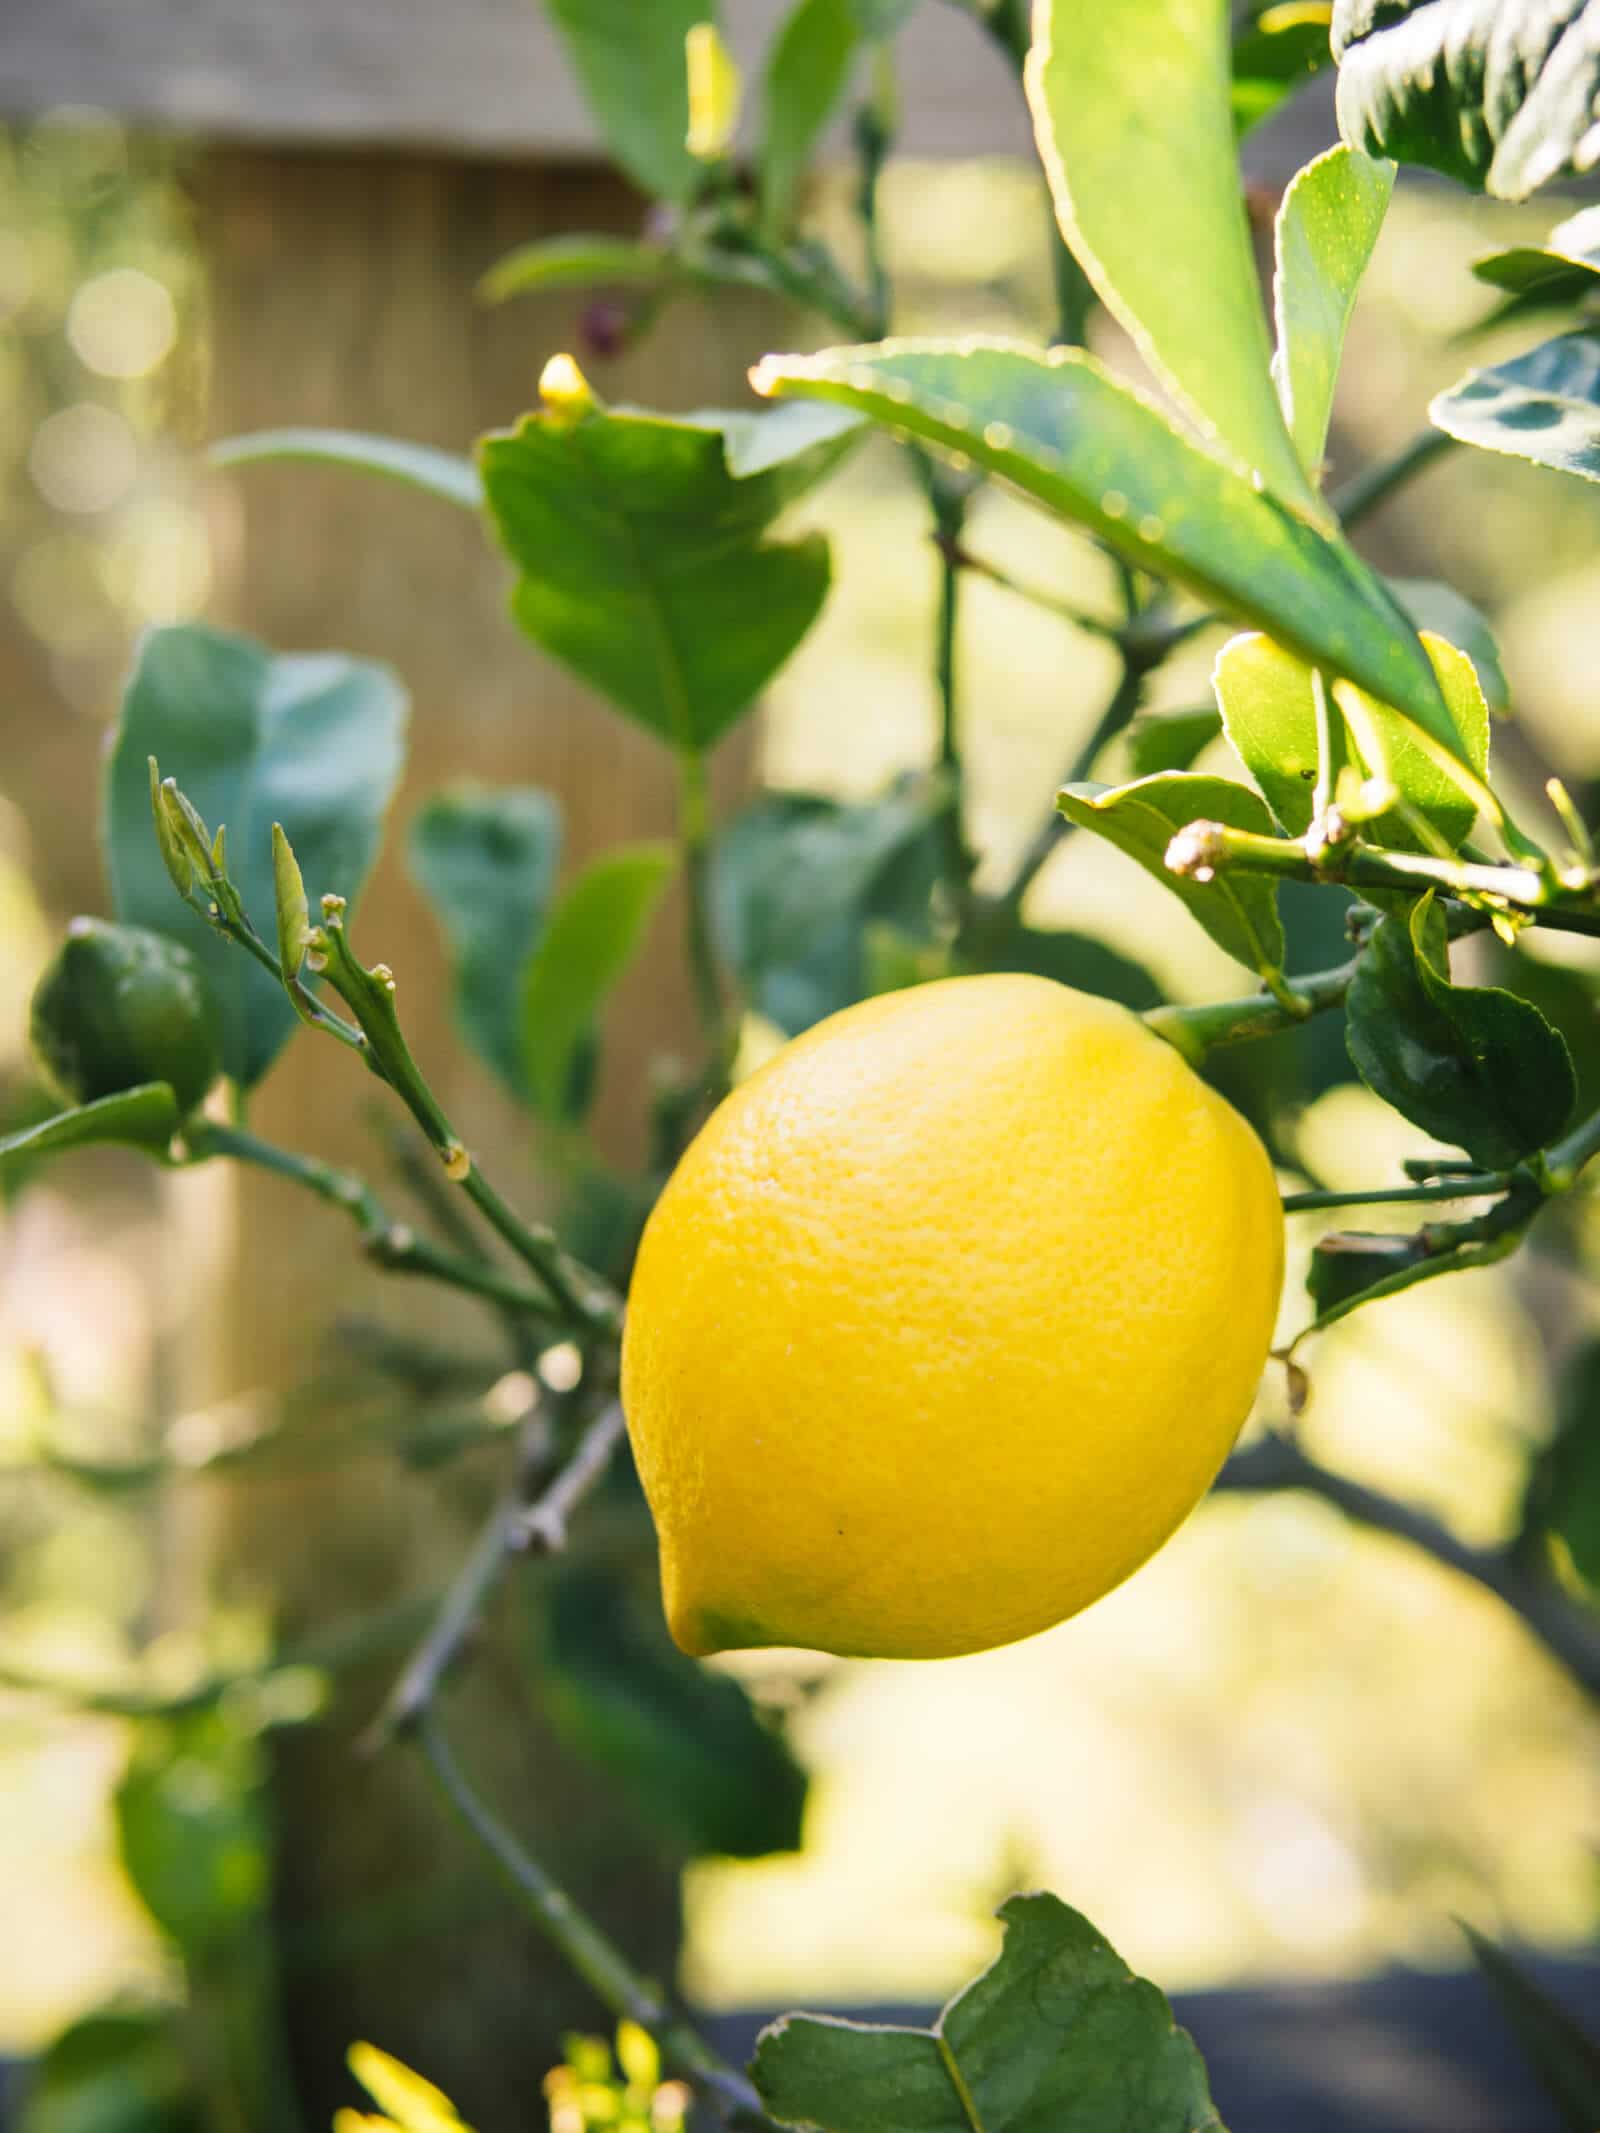 Lemon is a natural immune booster with antioxidant, antiviral, and antifungal benefits